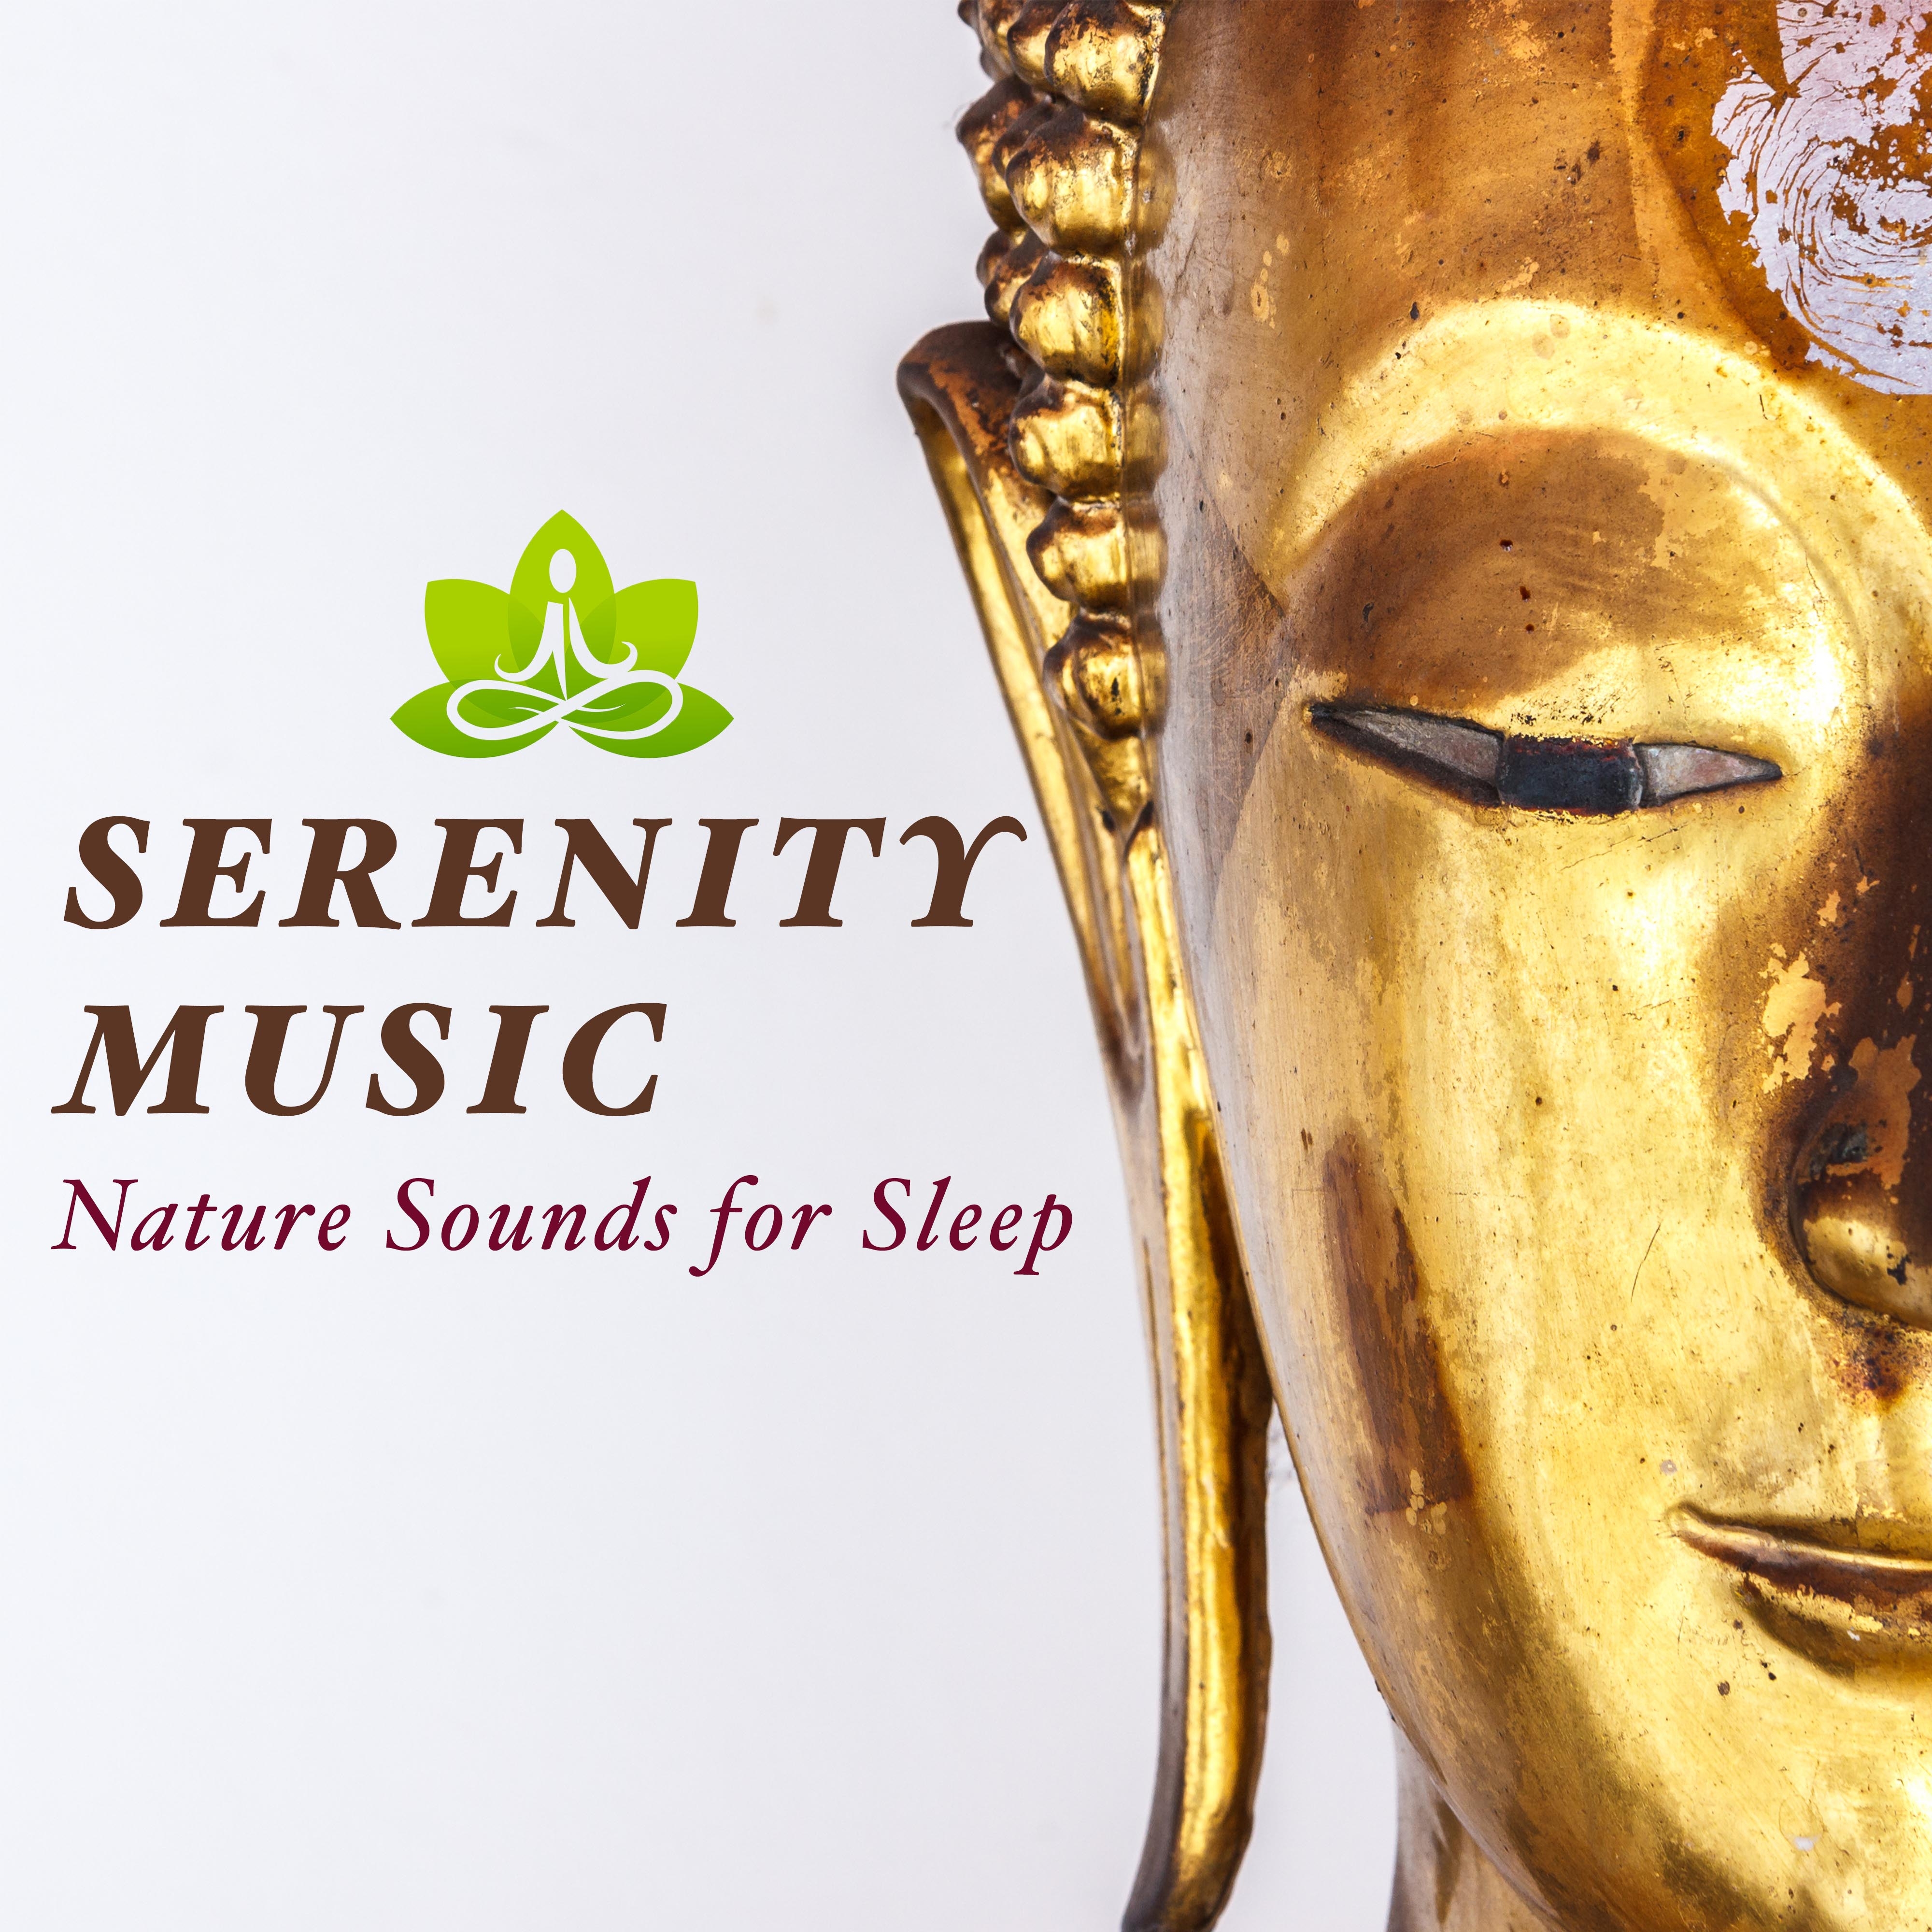 Serenity Music - Nature Sounds for Sleep